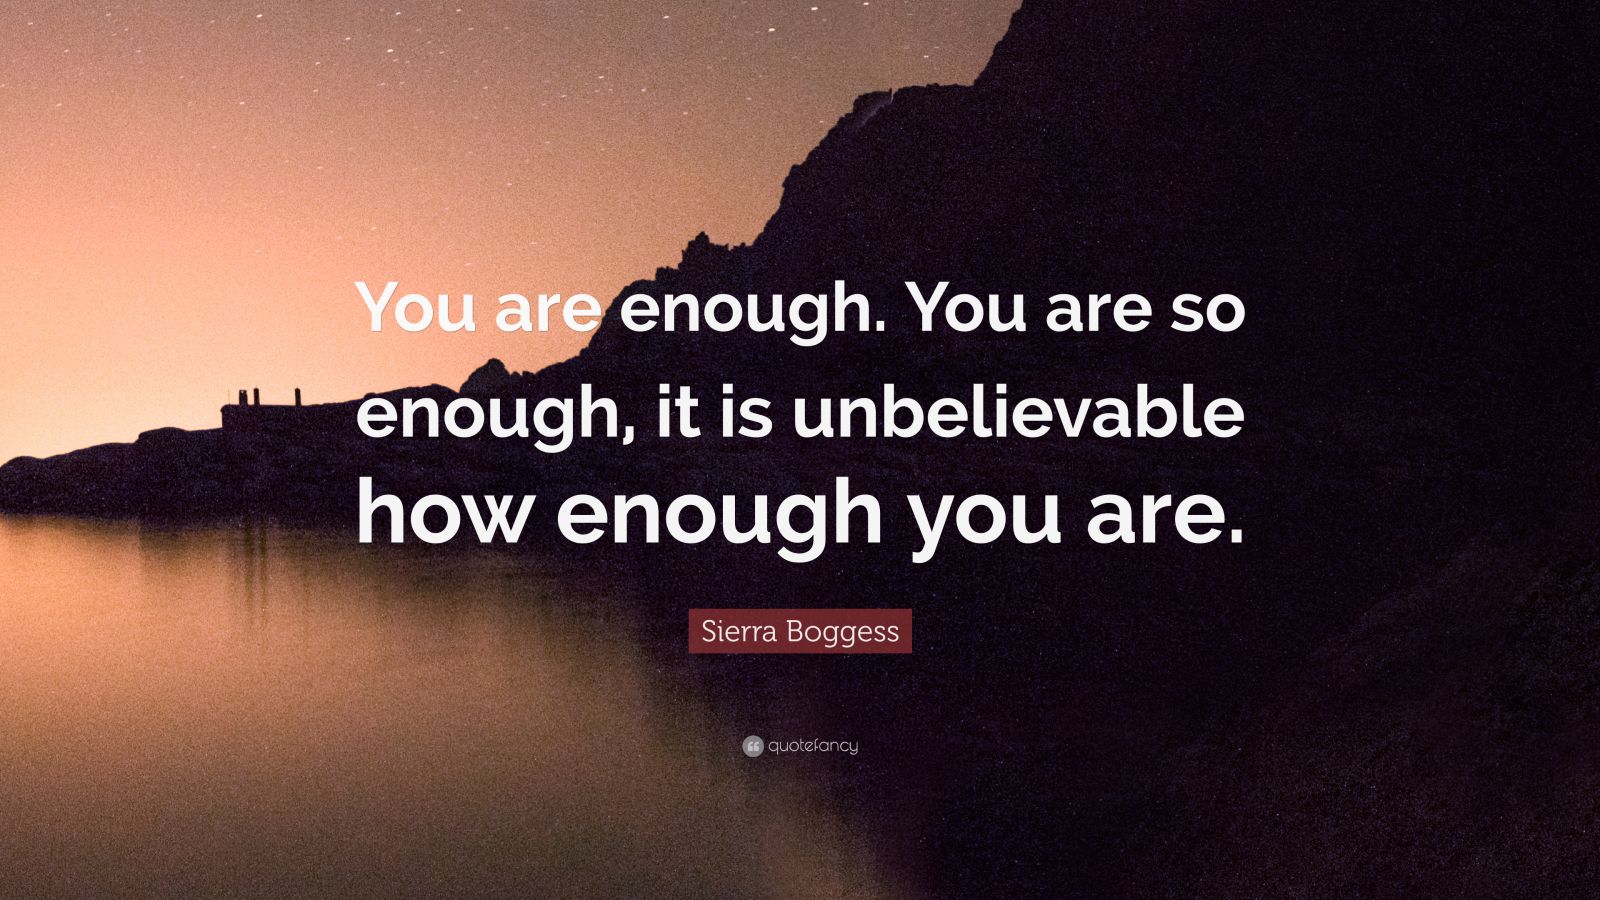 Sierra Boggess Quote: “You are enough. You are so enough, it is